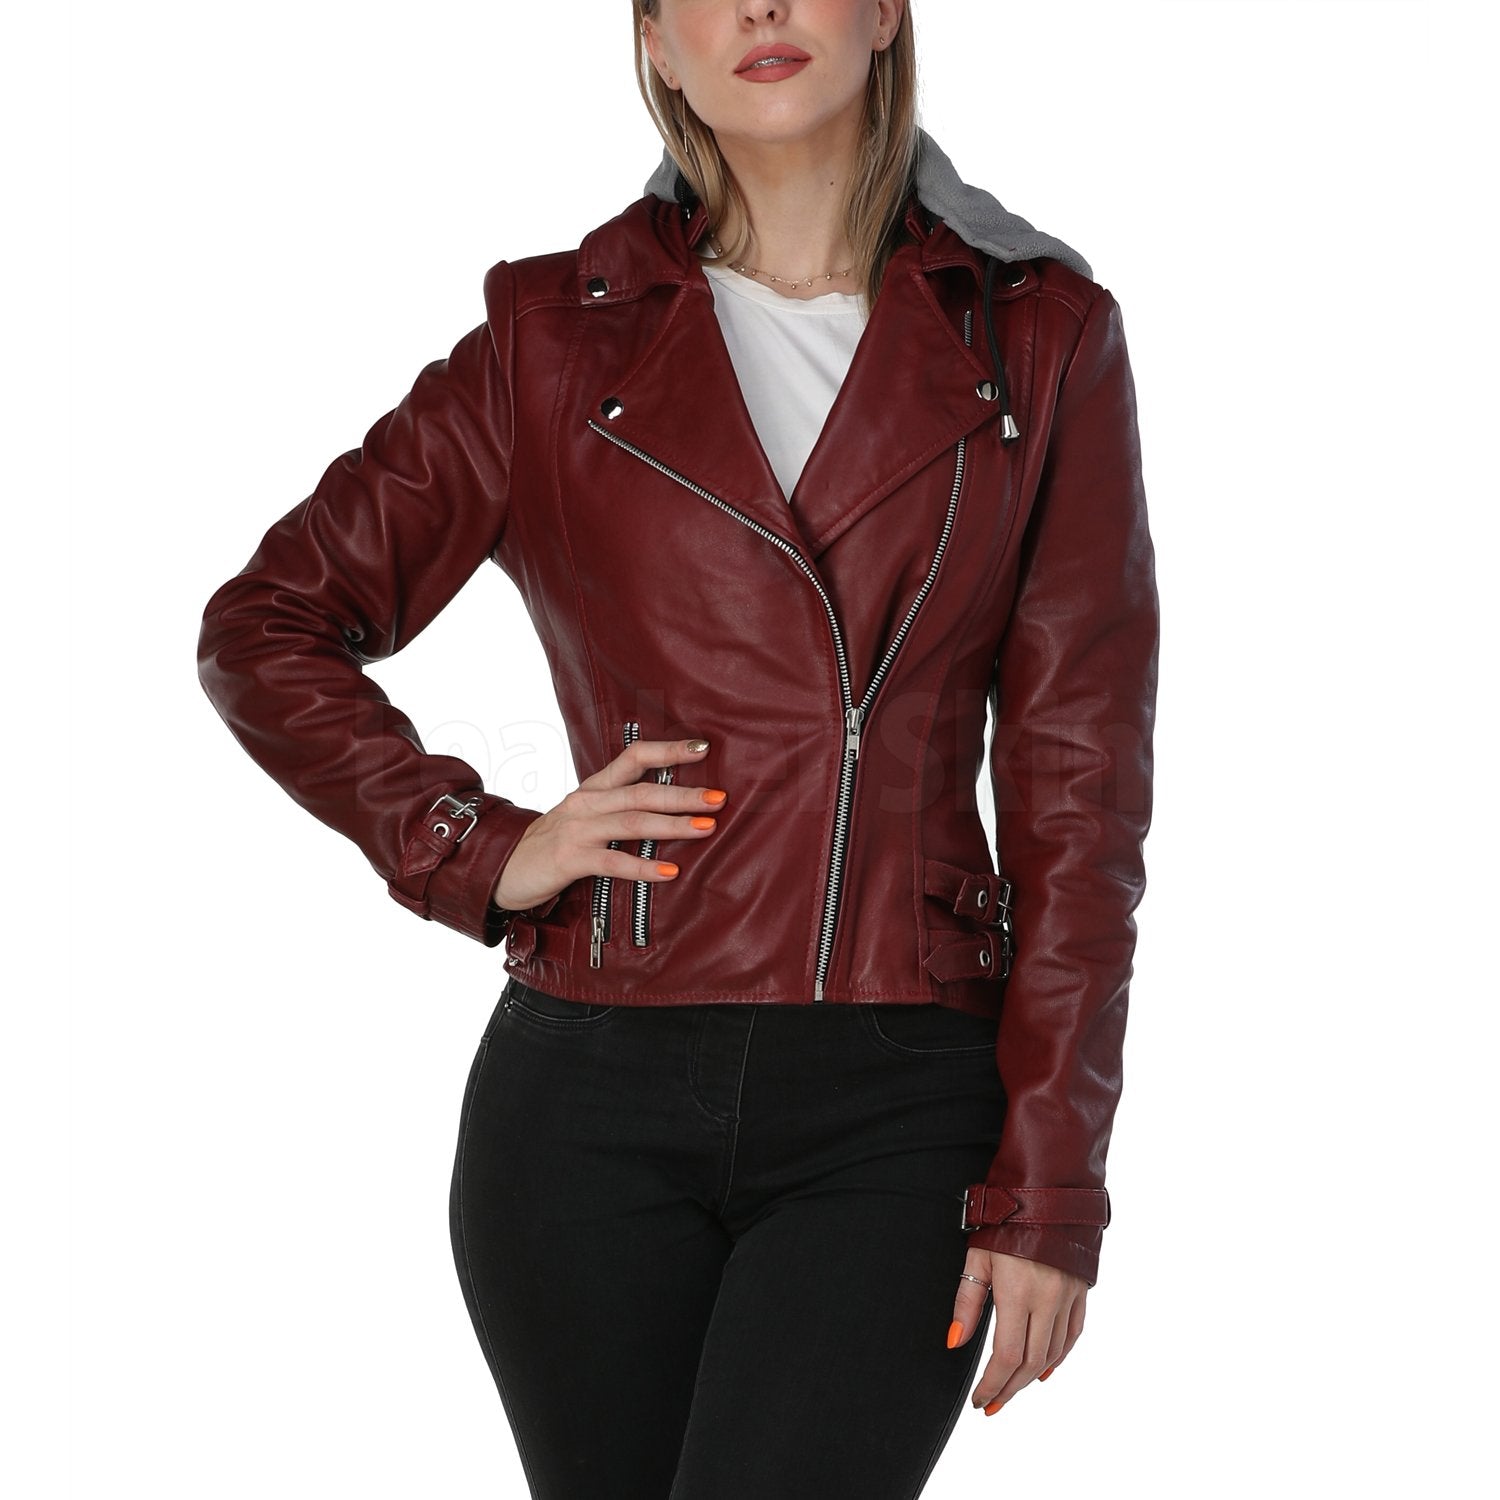 How To Style A Burgundy Leather Jacket - My Style Pill